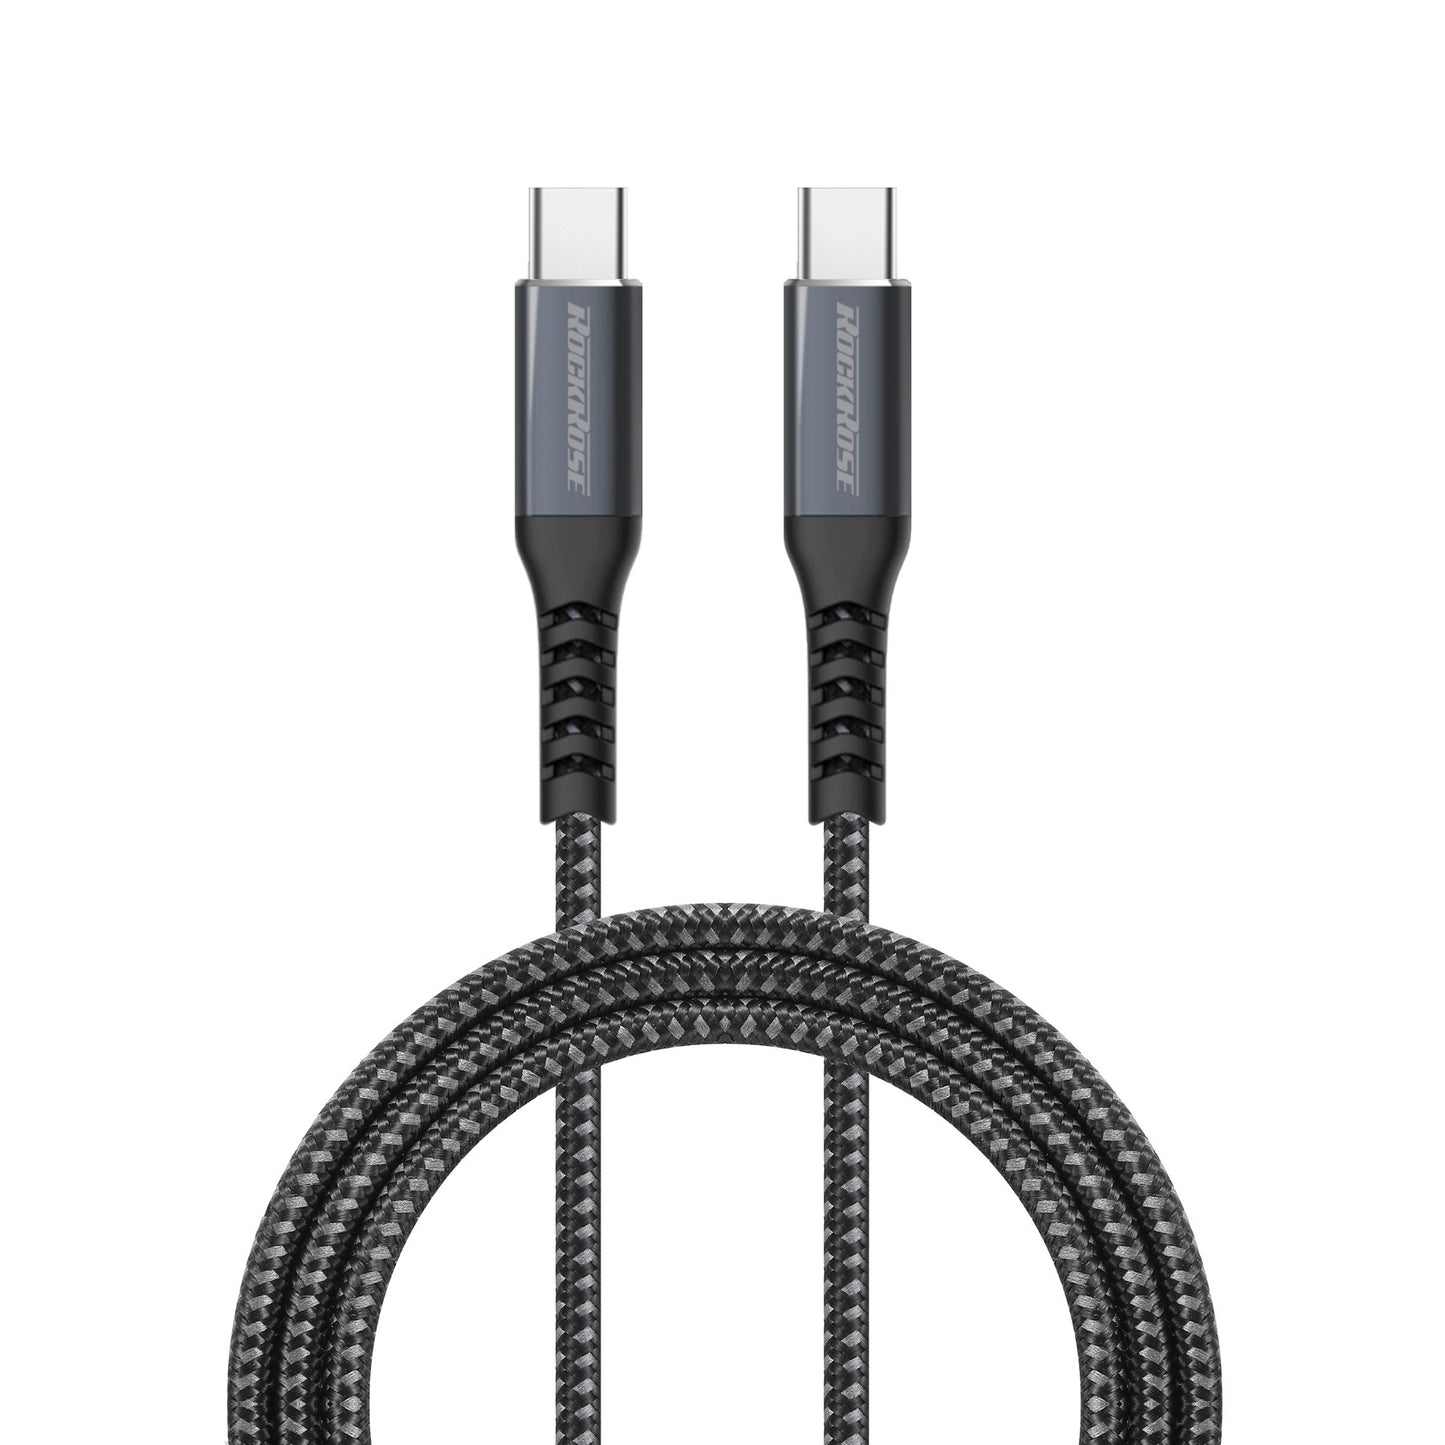 Rockrose Powerline CC1 Pro 3A 100W Max 1M USB-C to USB-C Fast Charge & Data Sync Cable